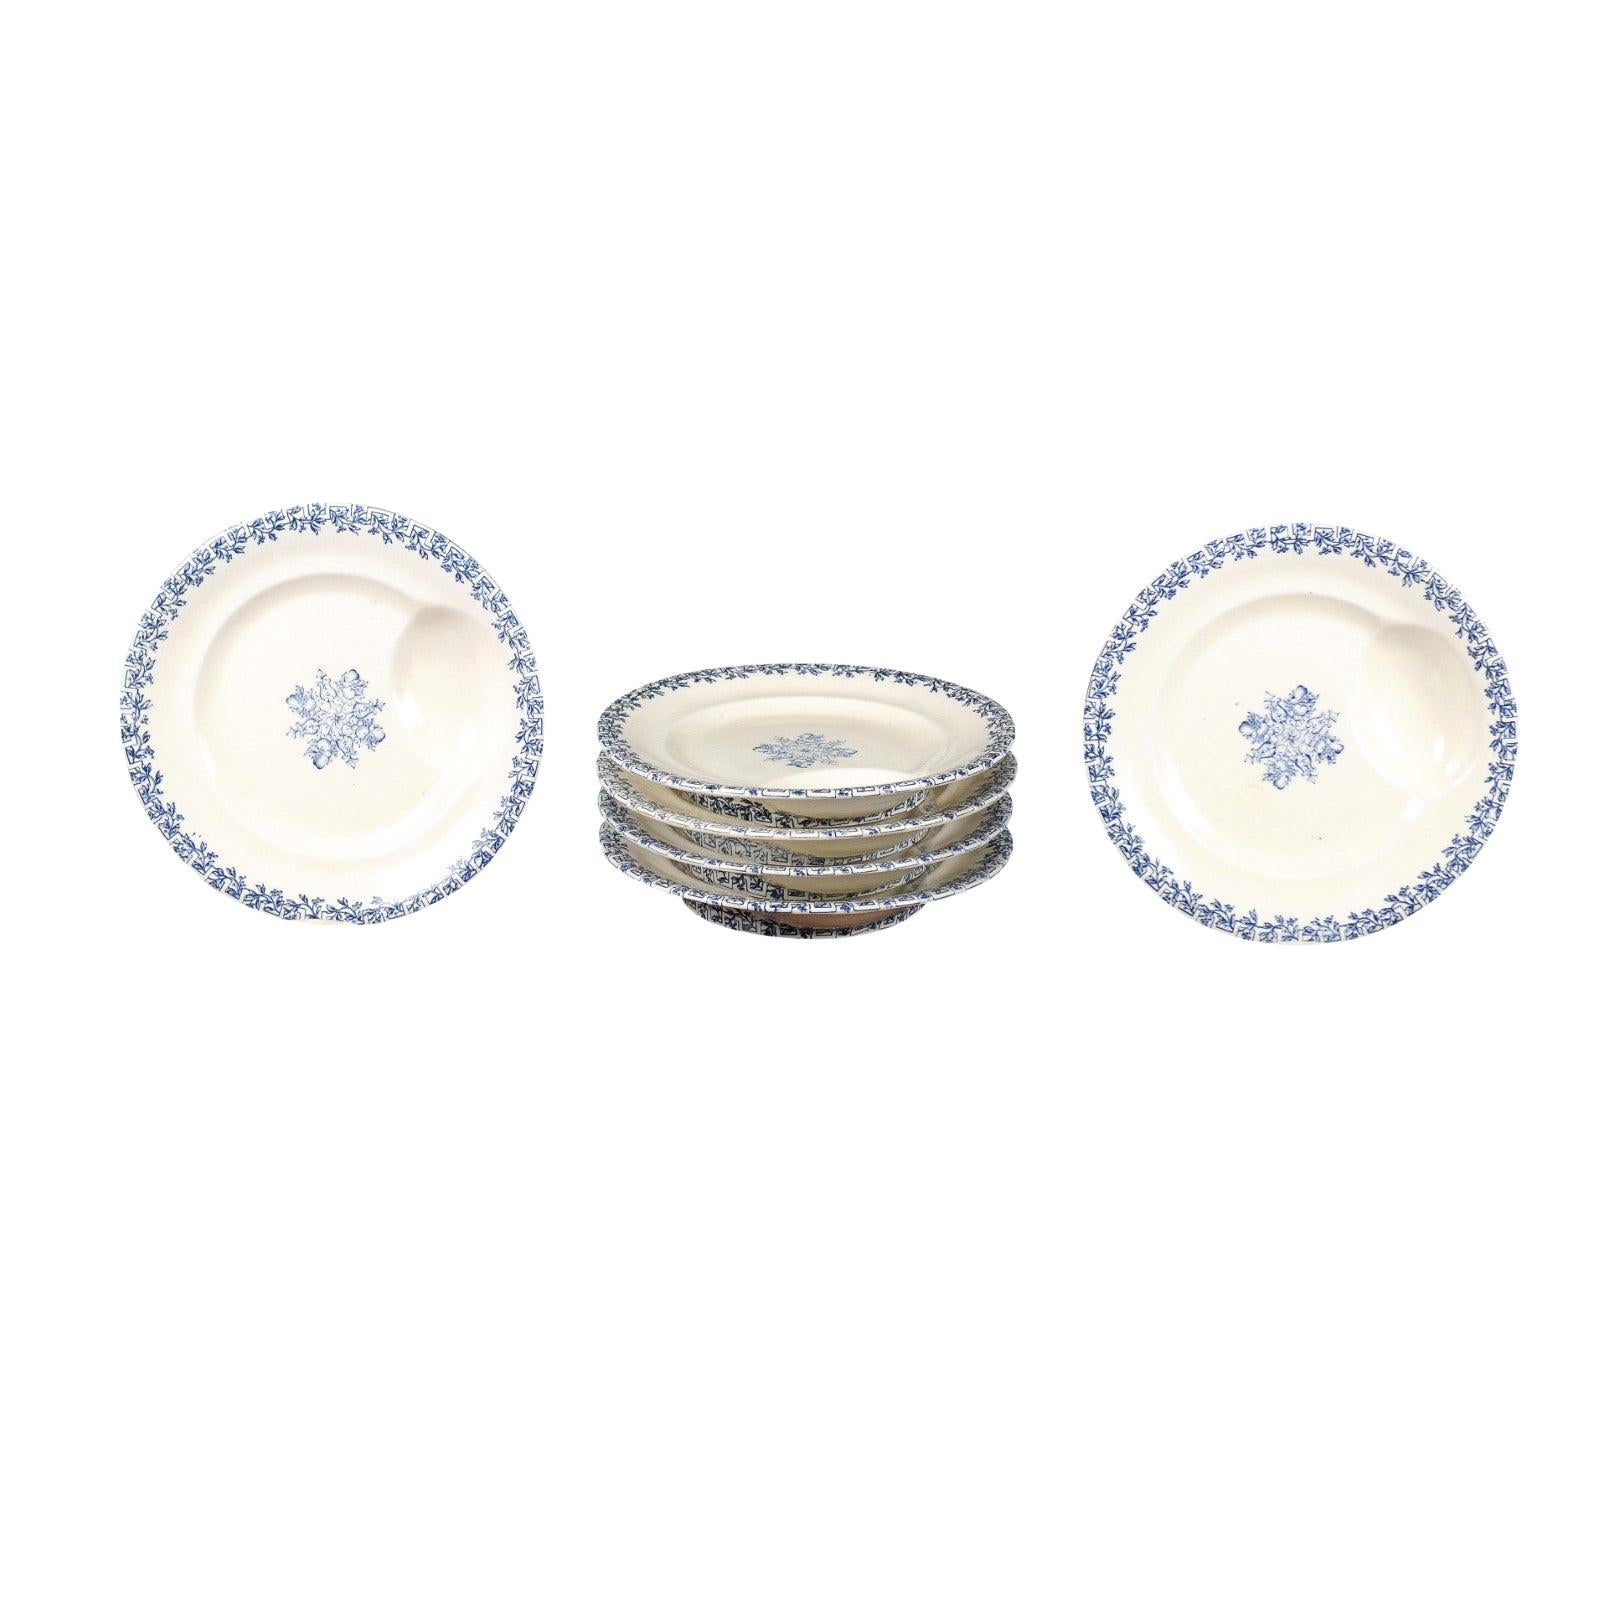 French Terre de Fer 19th Century Blue and White Asparagus Plates, Six Available